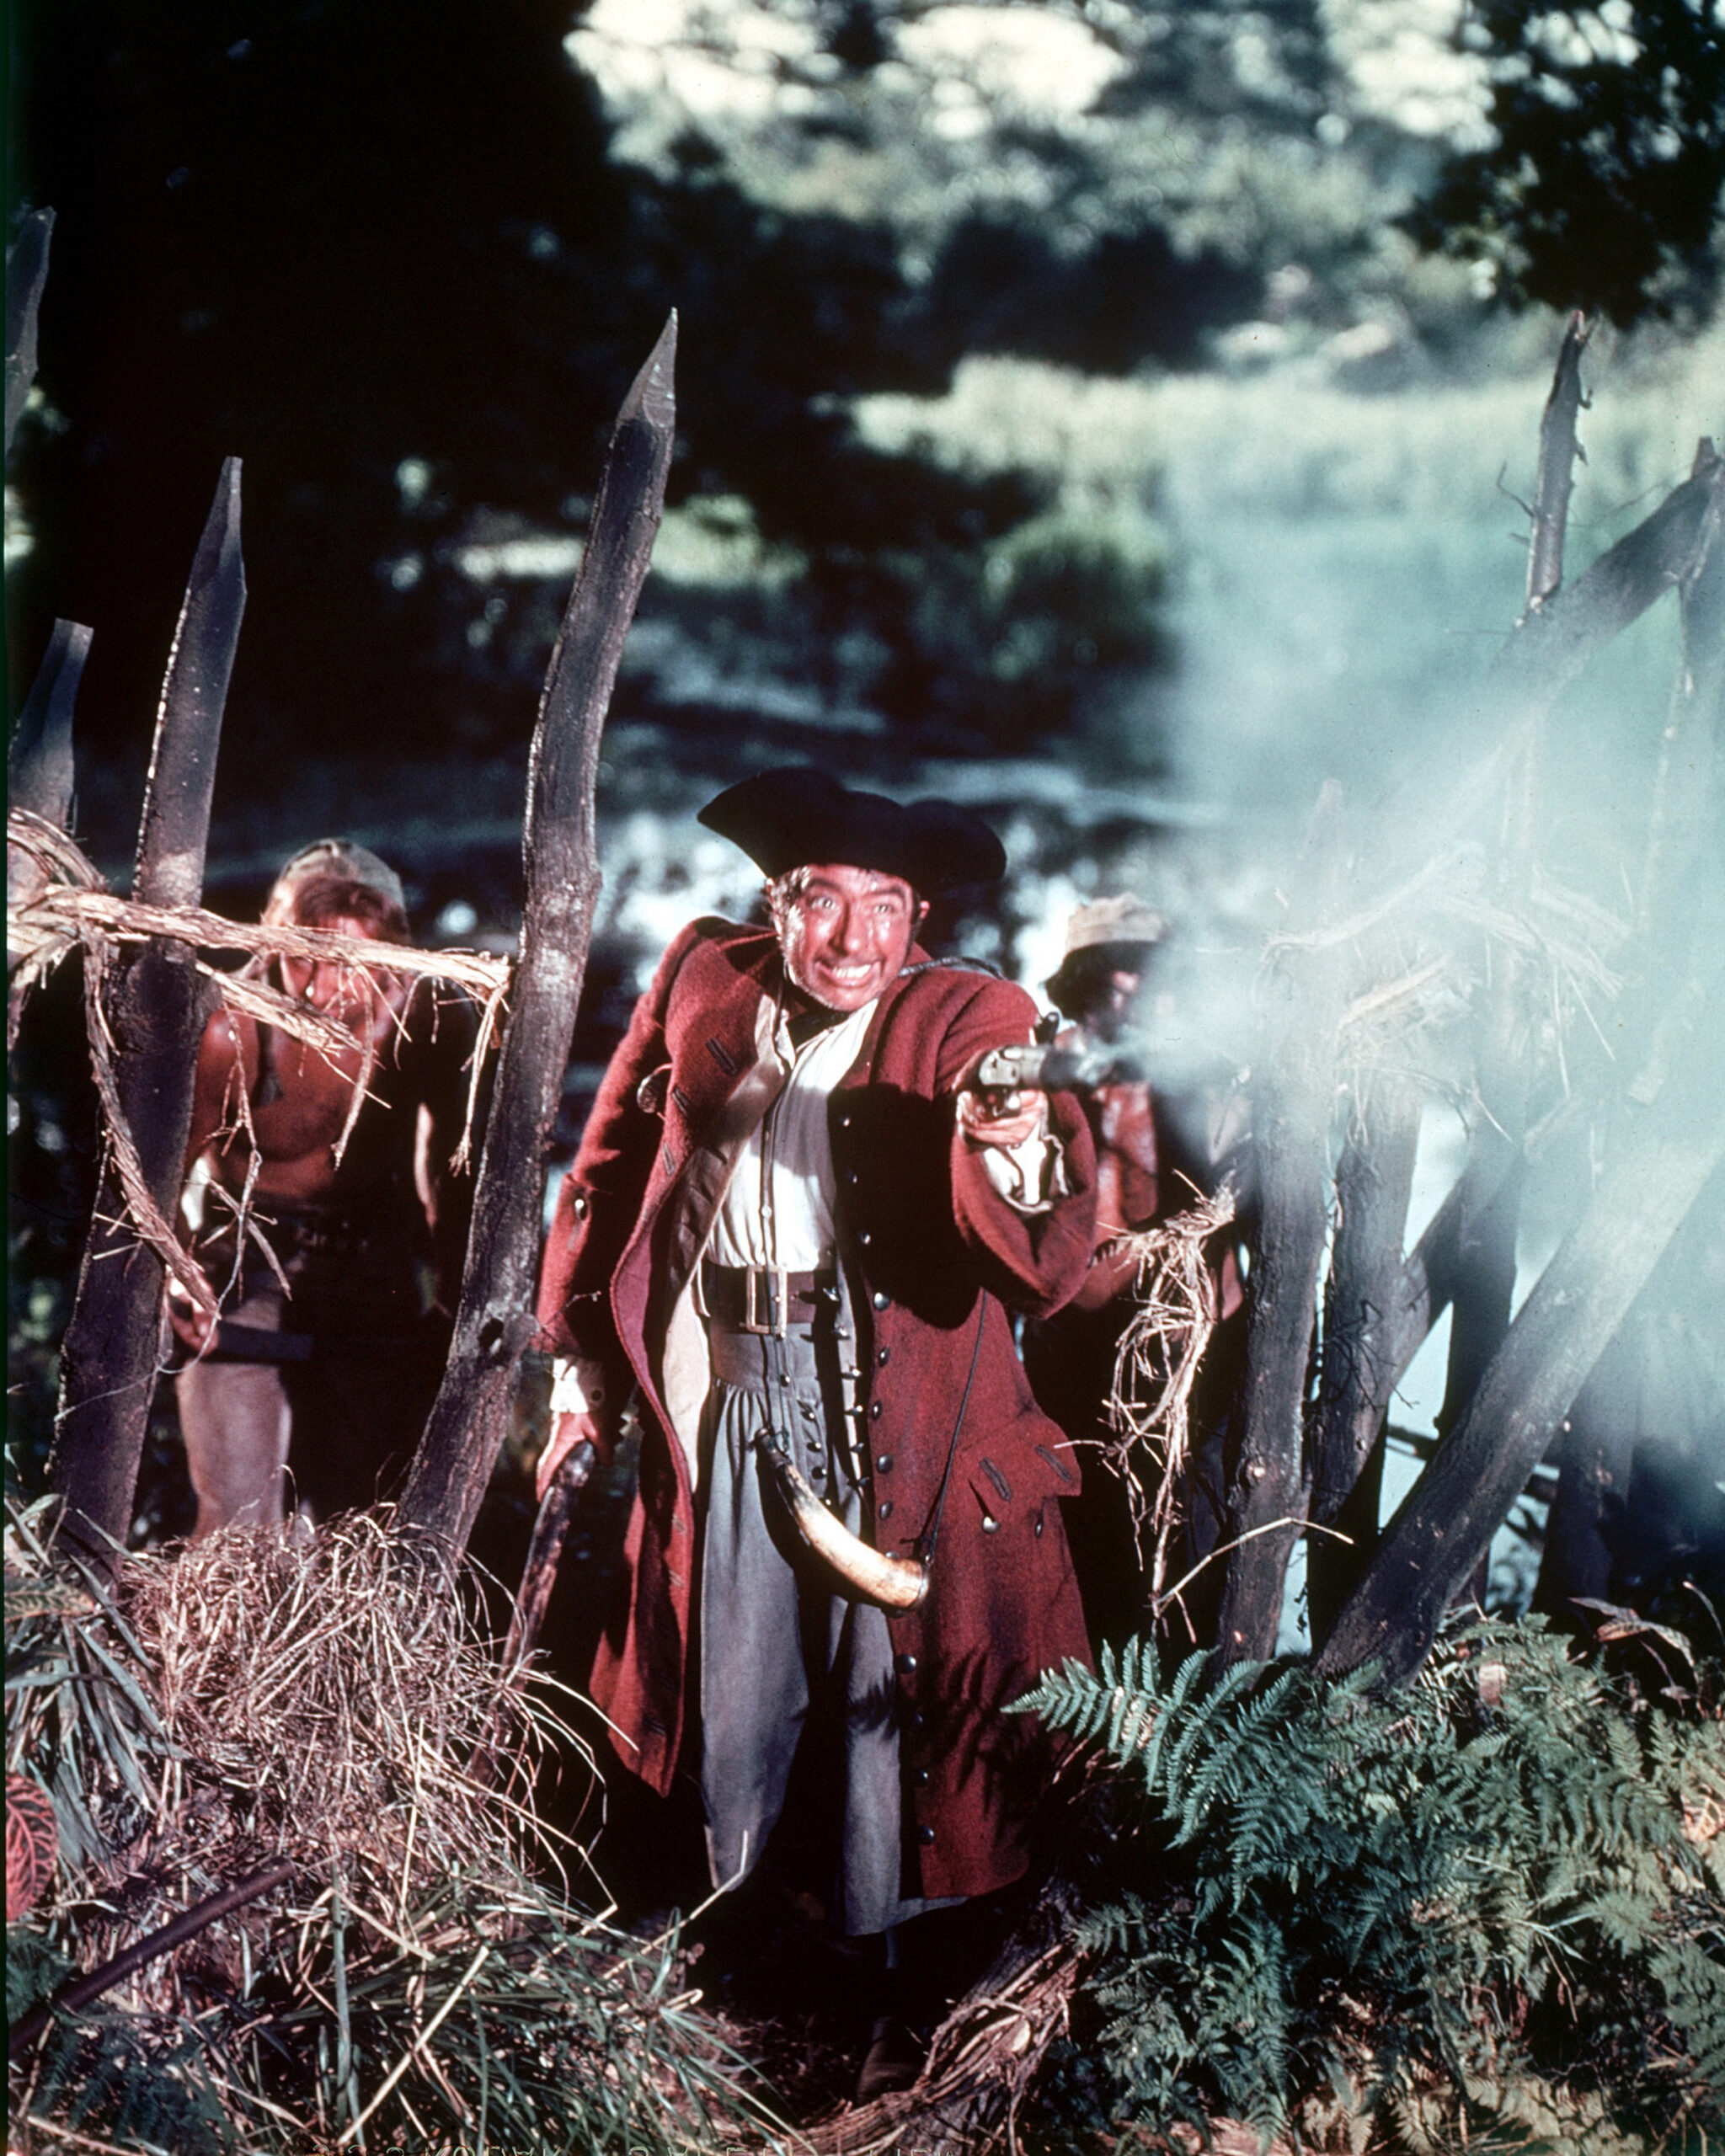 British actor Robert Newton (1905 - 1956) stars as Long John Silver in the film 'Treasure Island', 1950. (Photo by Silver Screen Collection/Getty Images)